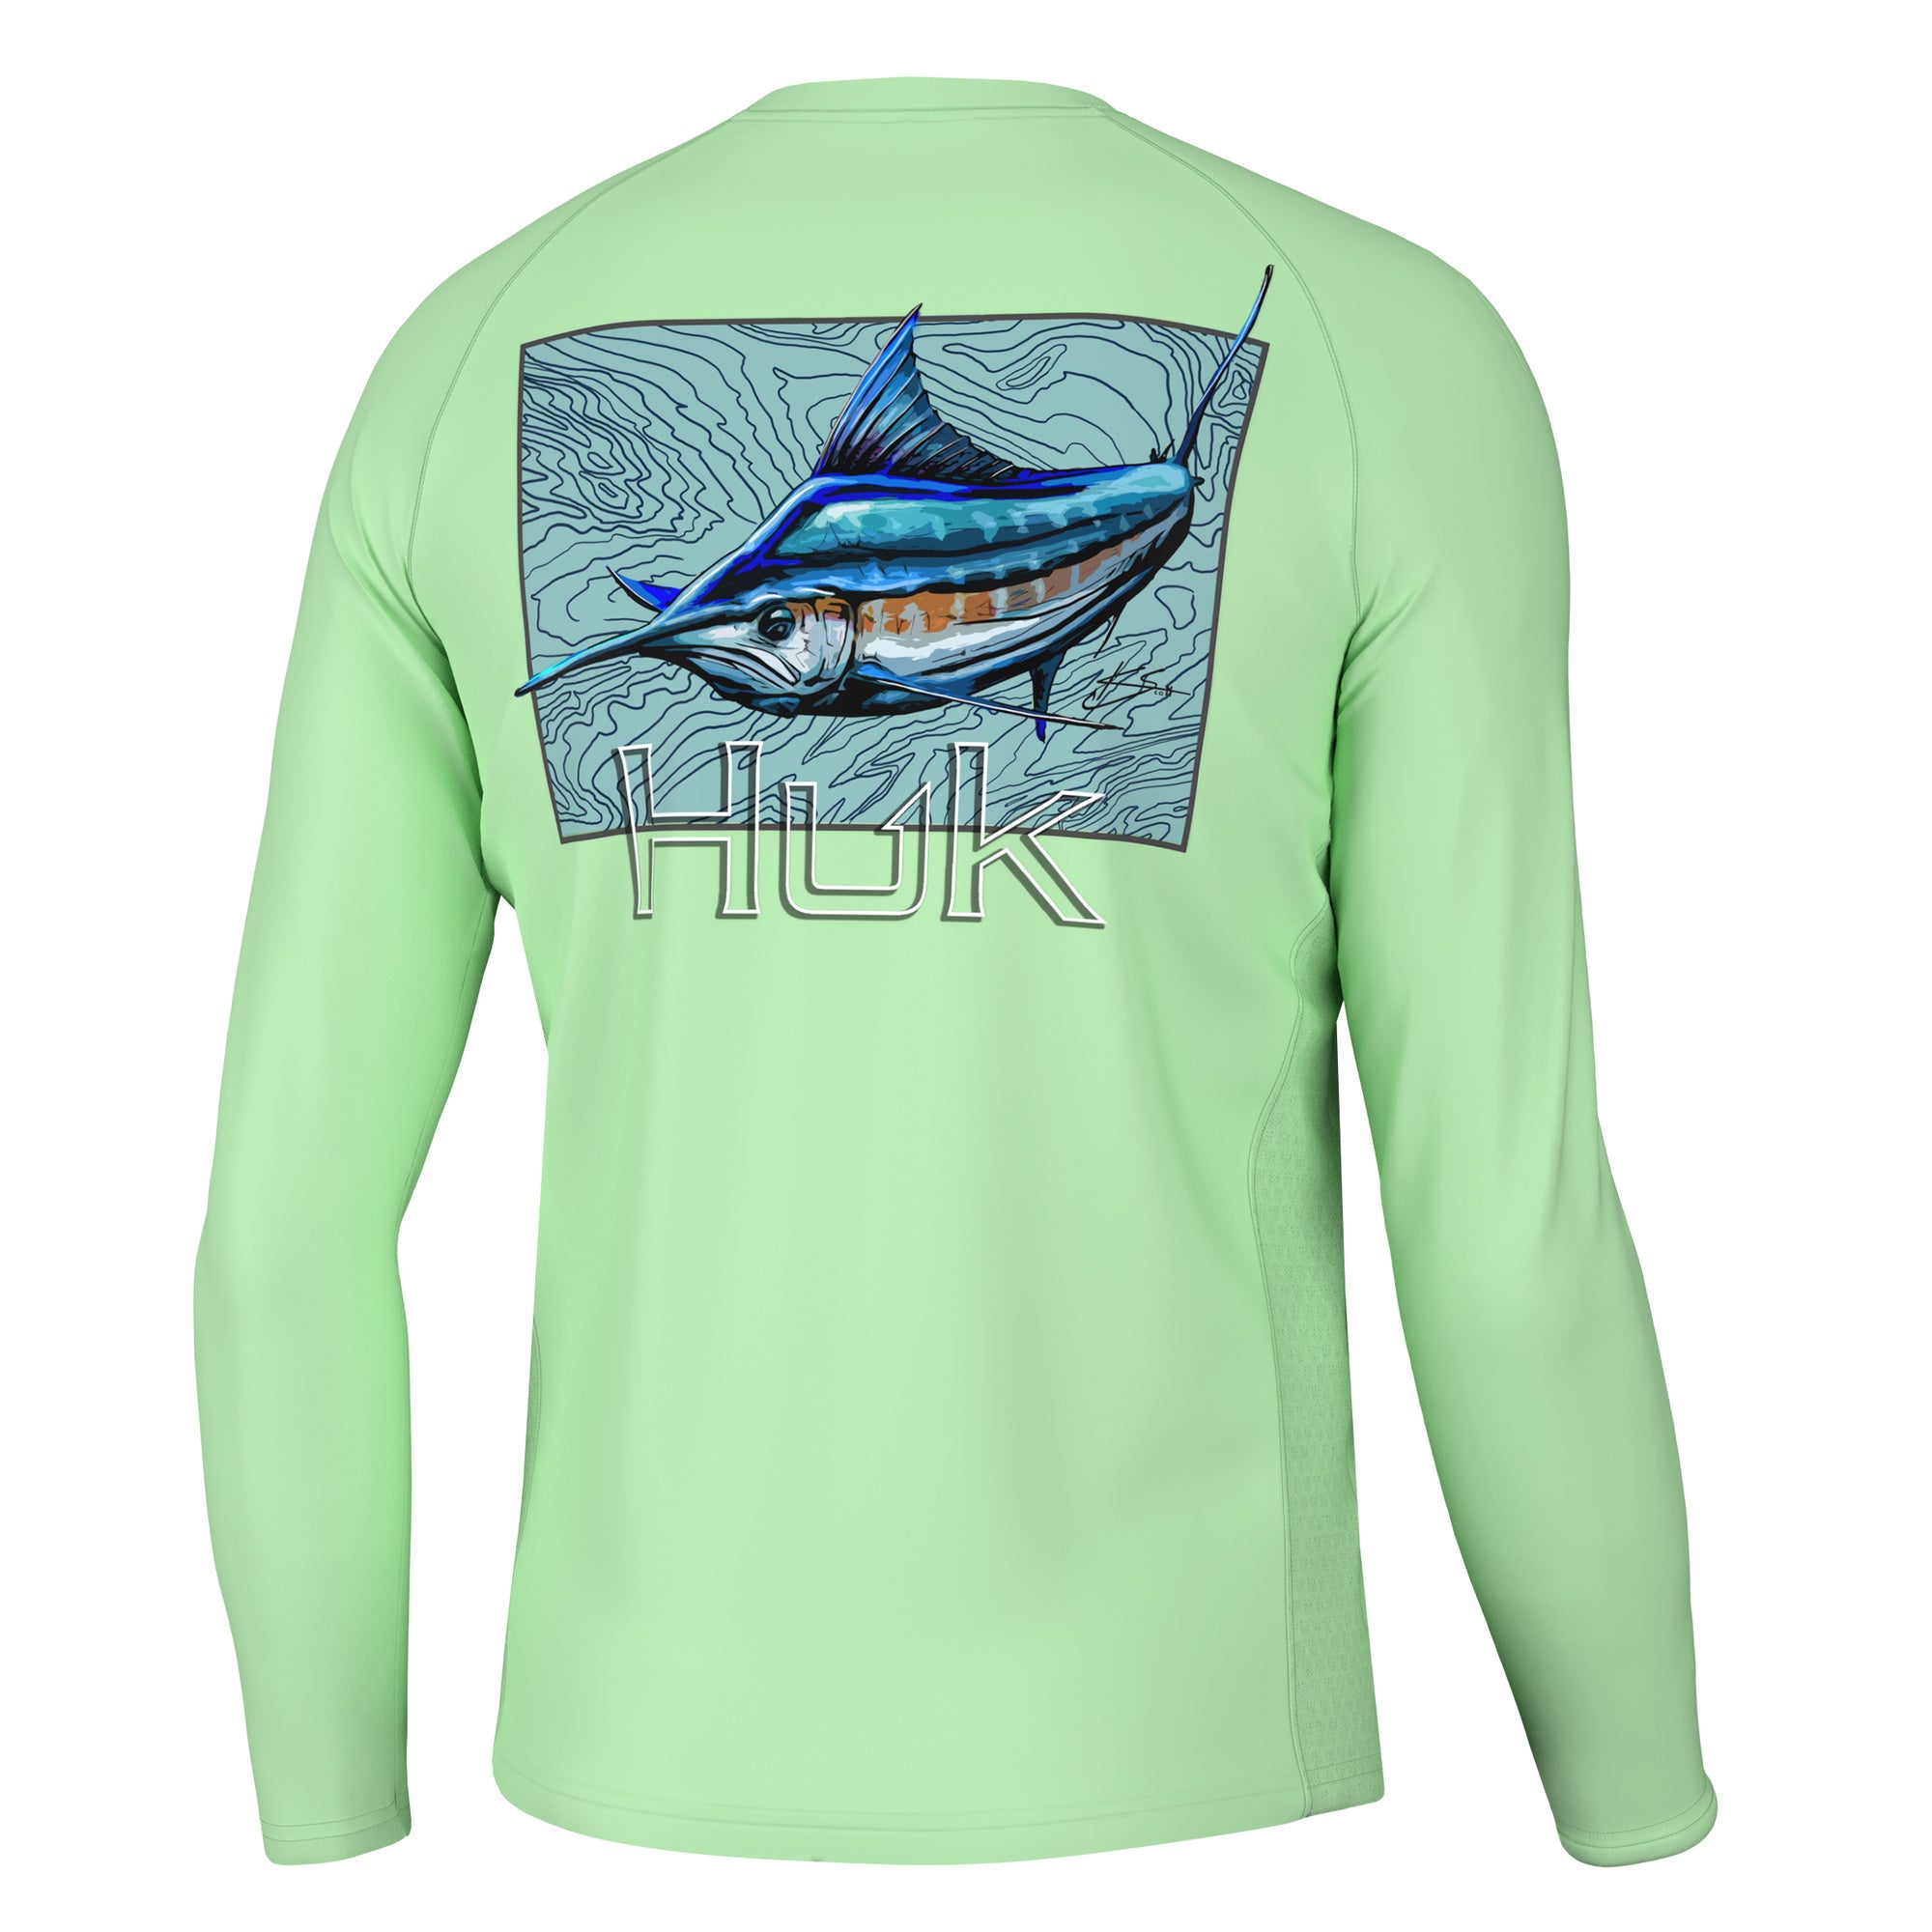 Huk Fishing Youth KC Flag Fish Pursuit Long Sleeve T-Shirt for